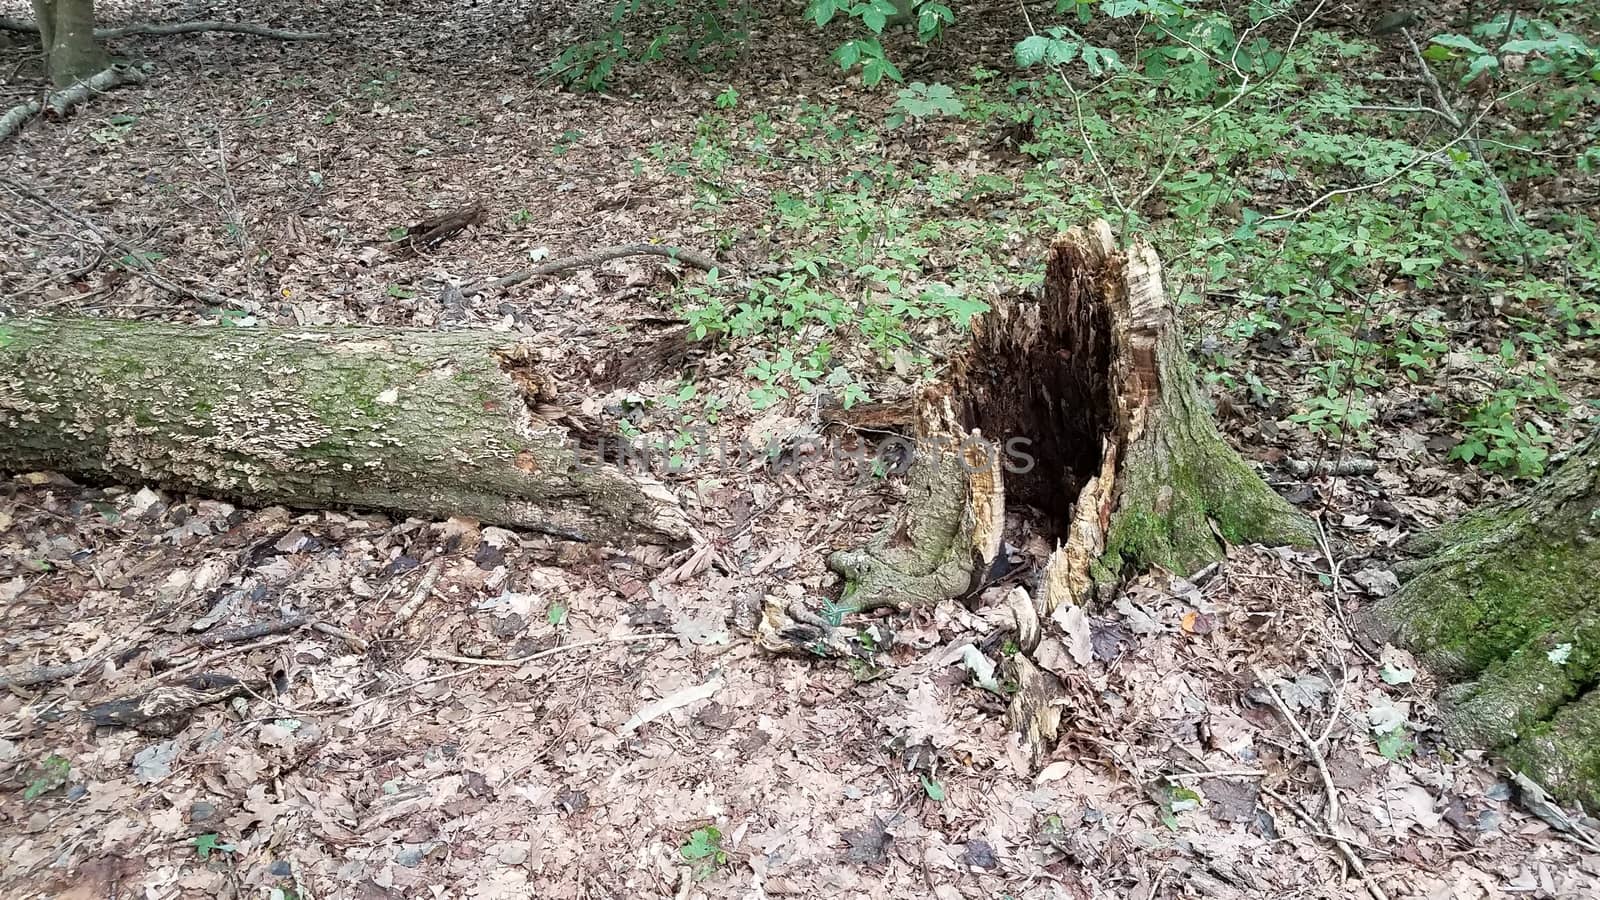 fallen rotten tree with stump in forest or woods by stockphotofan1